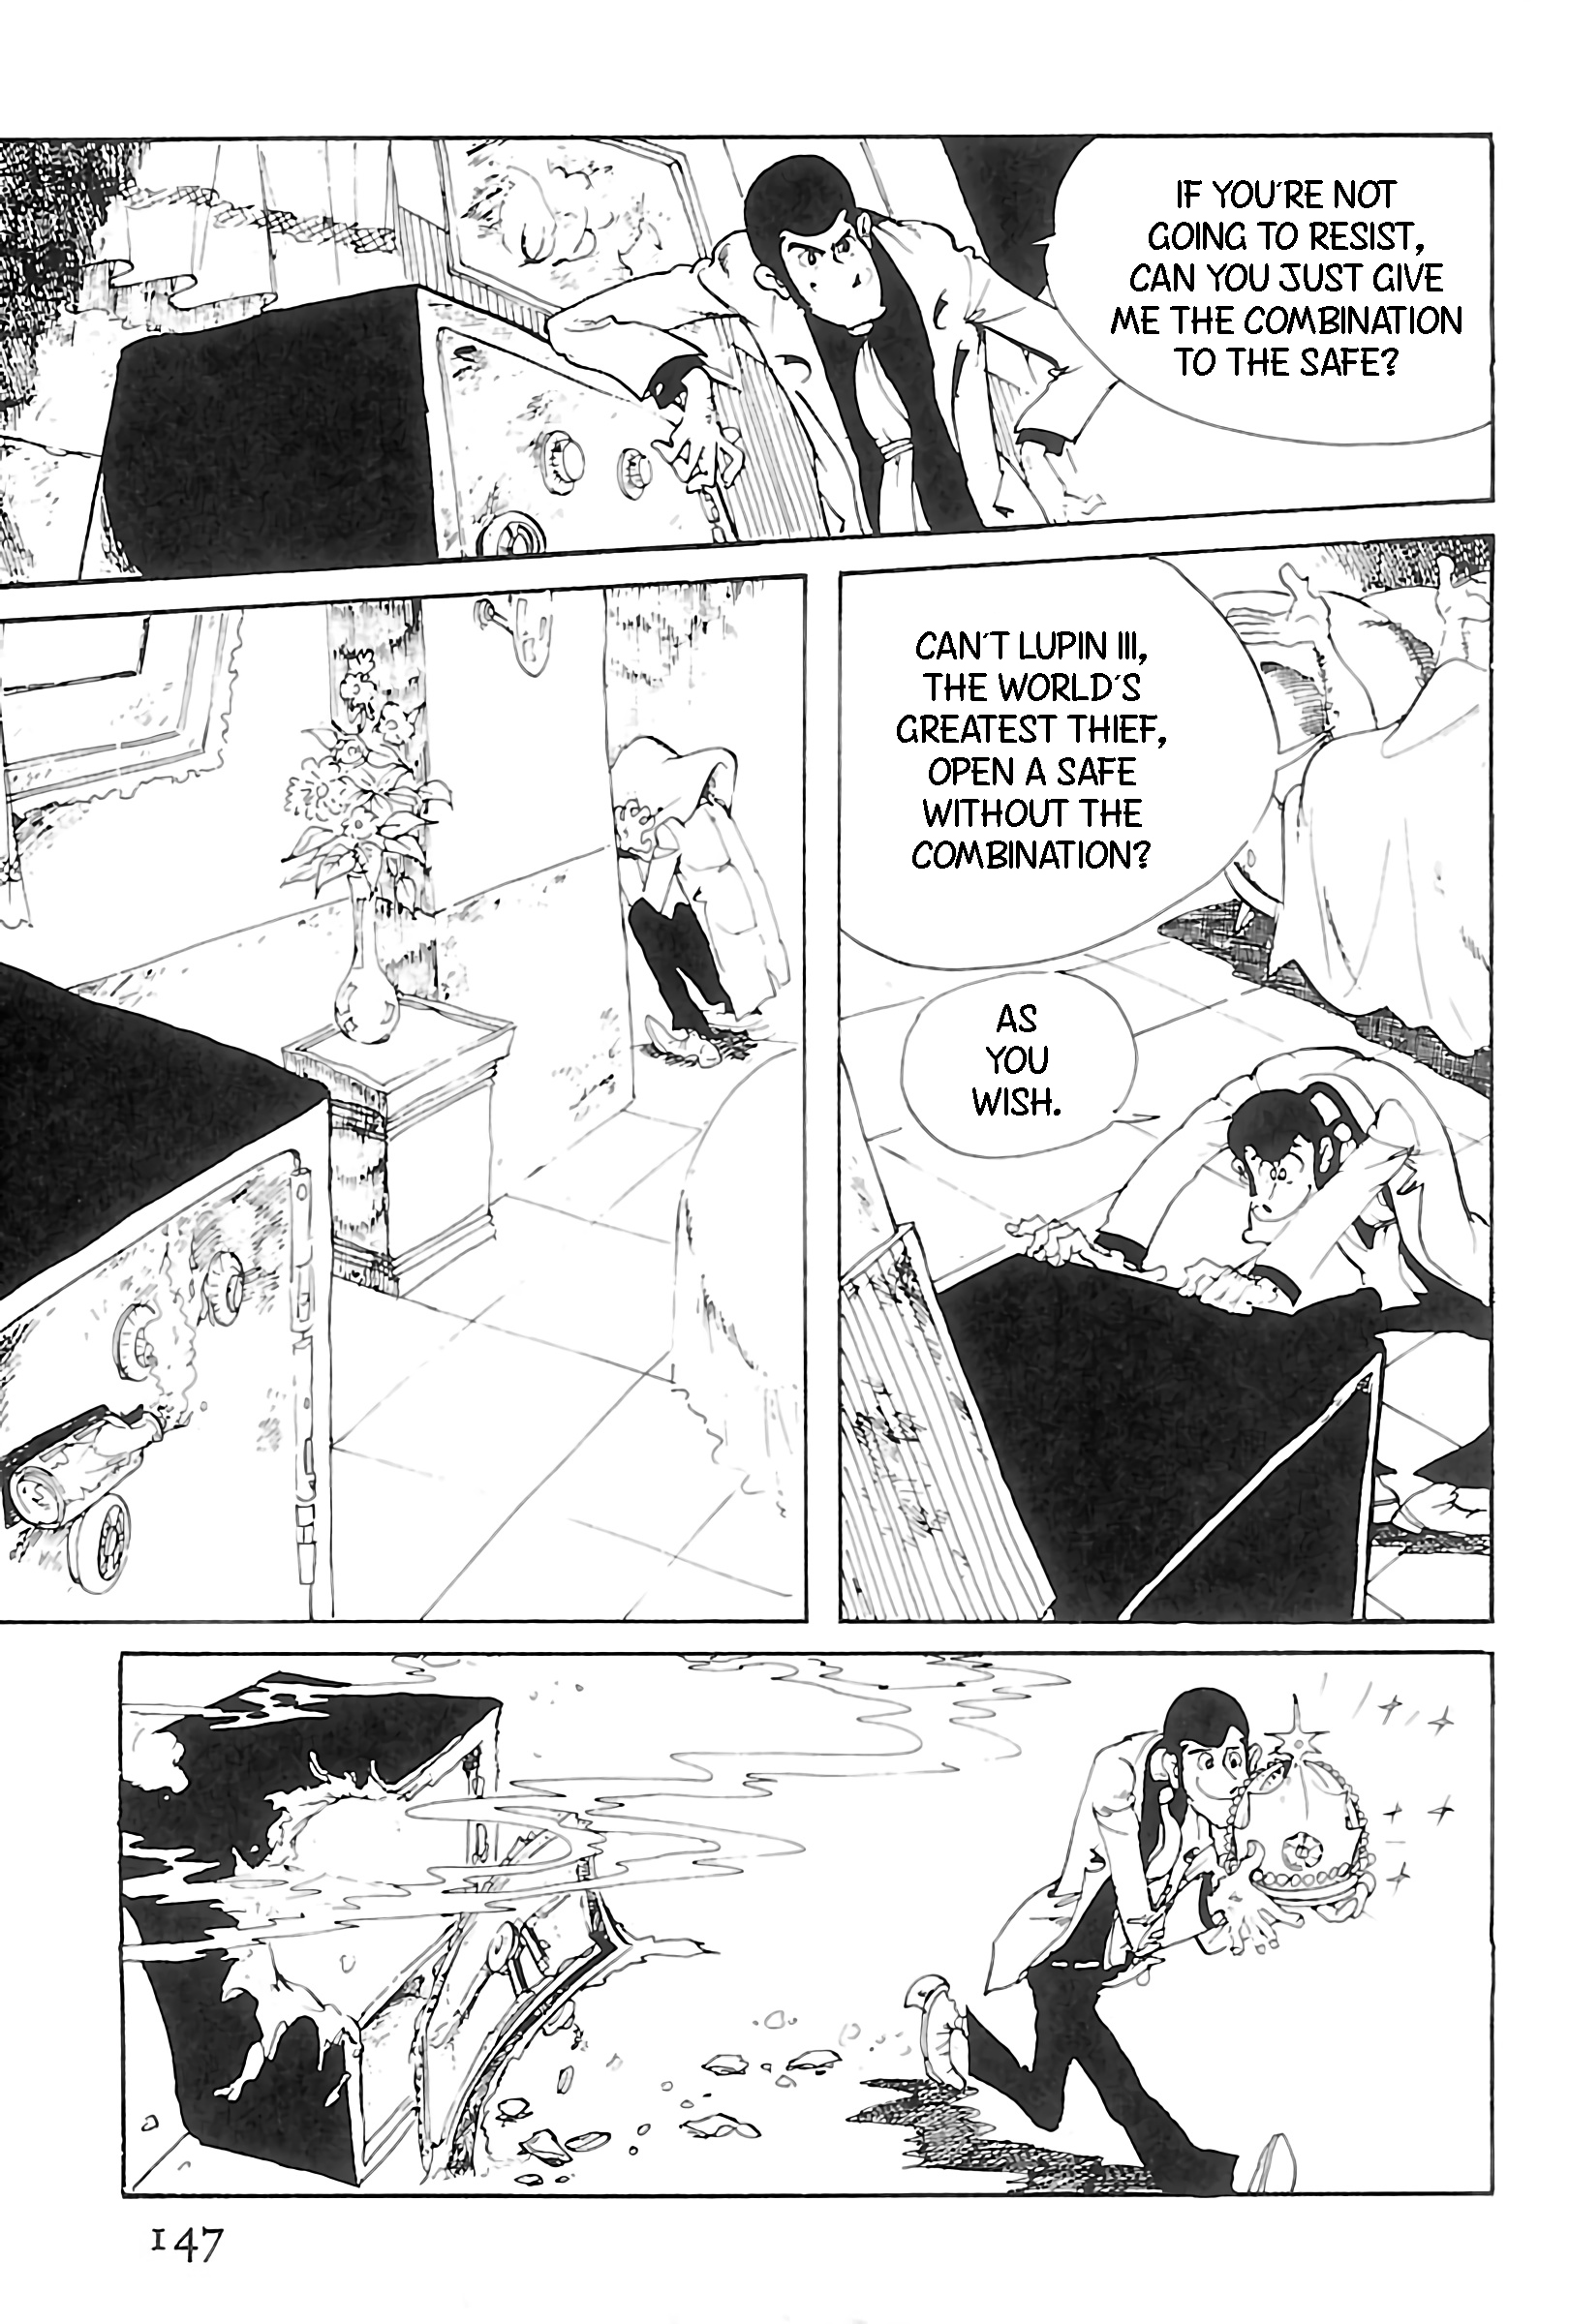 Lupin Iii: World’S Most Wanted Vol.9 Chapter 95: Hard Rock Lupin - Picture 3